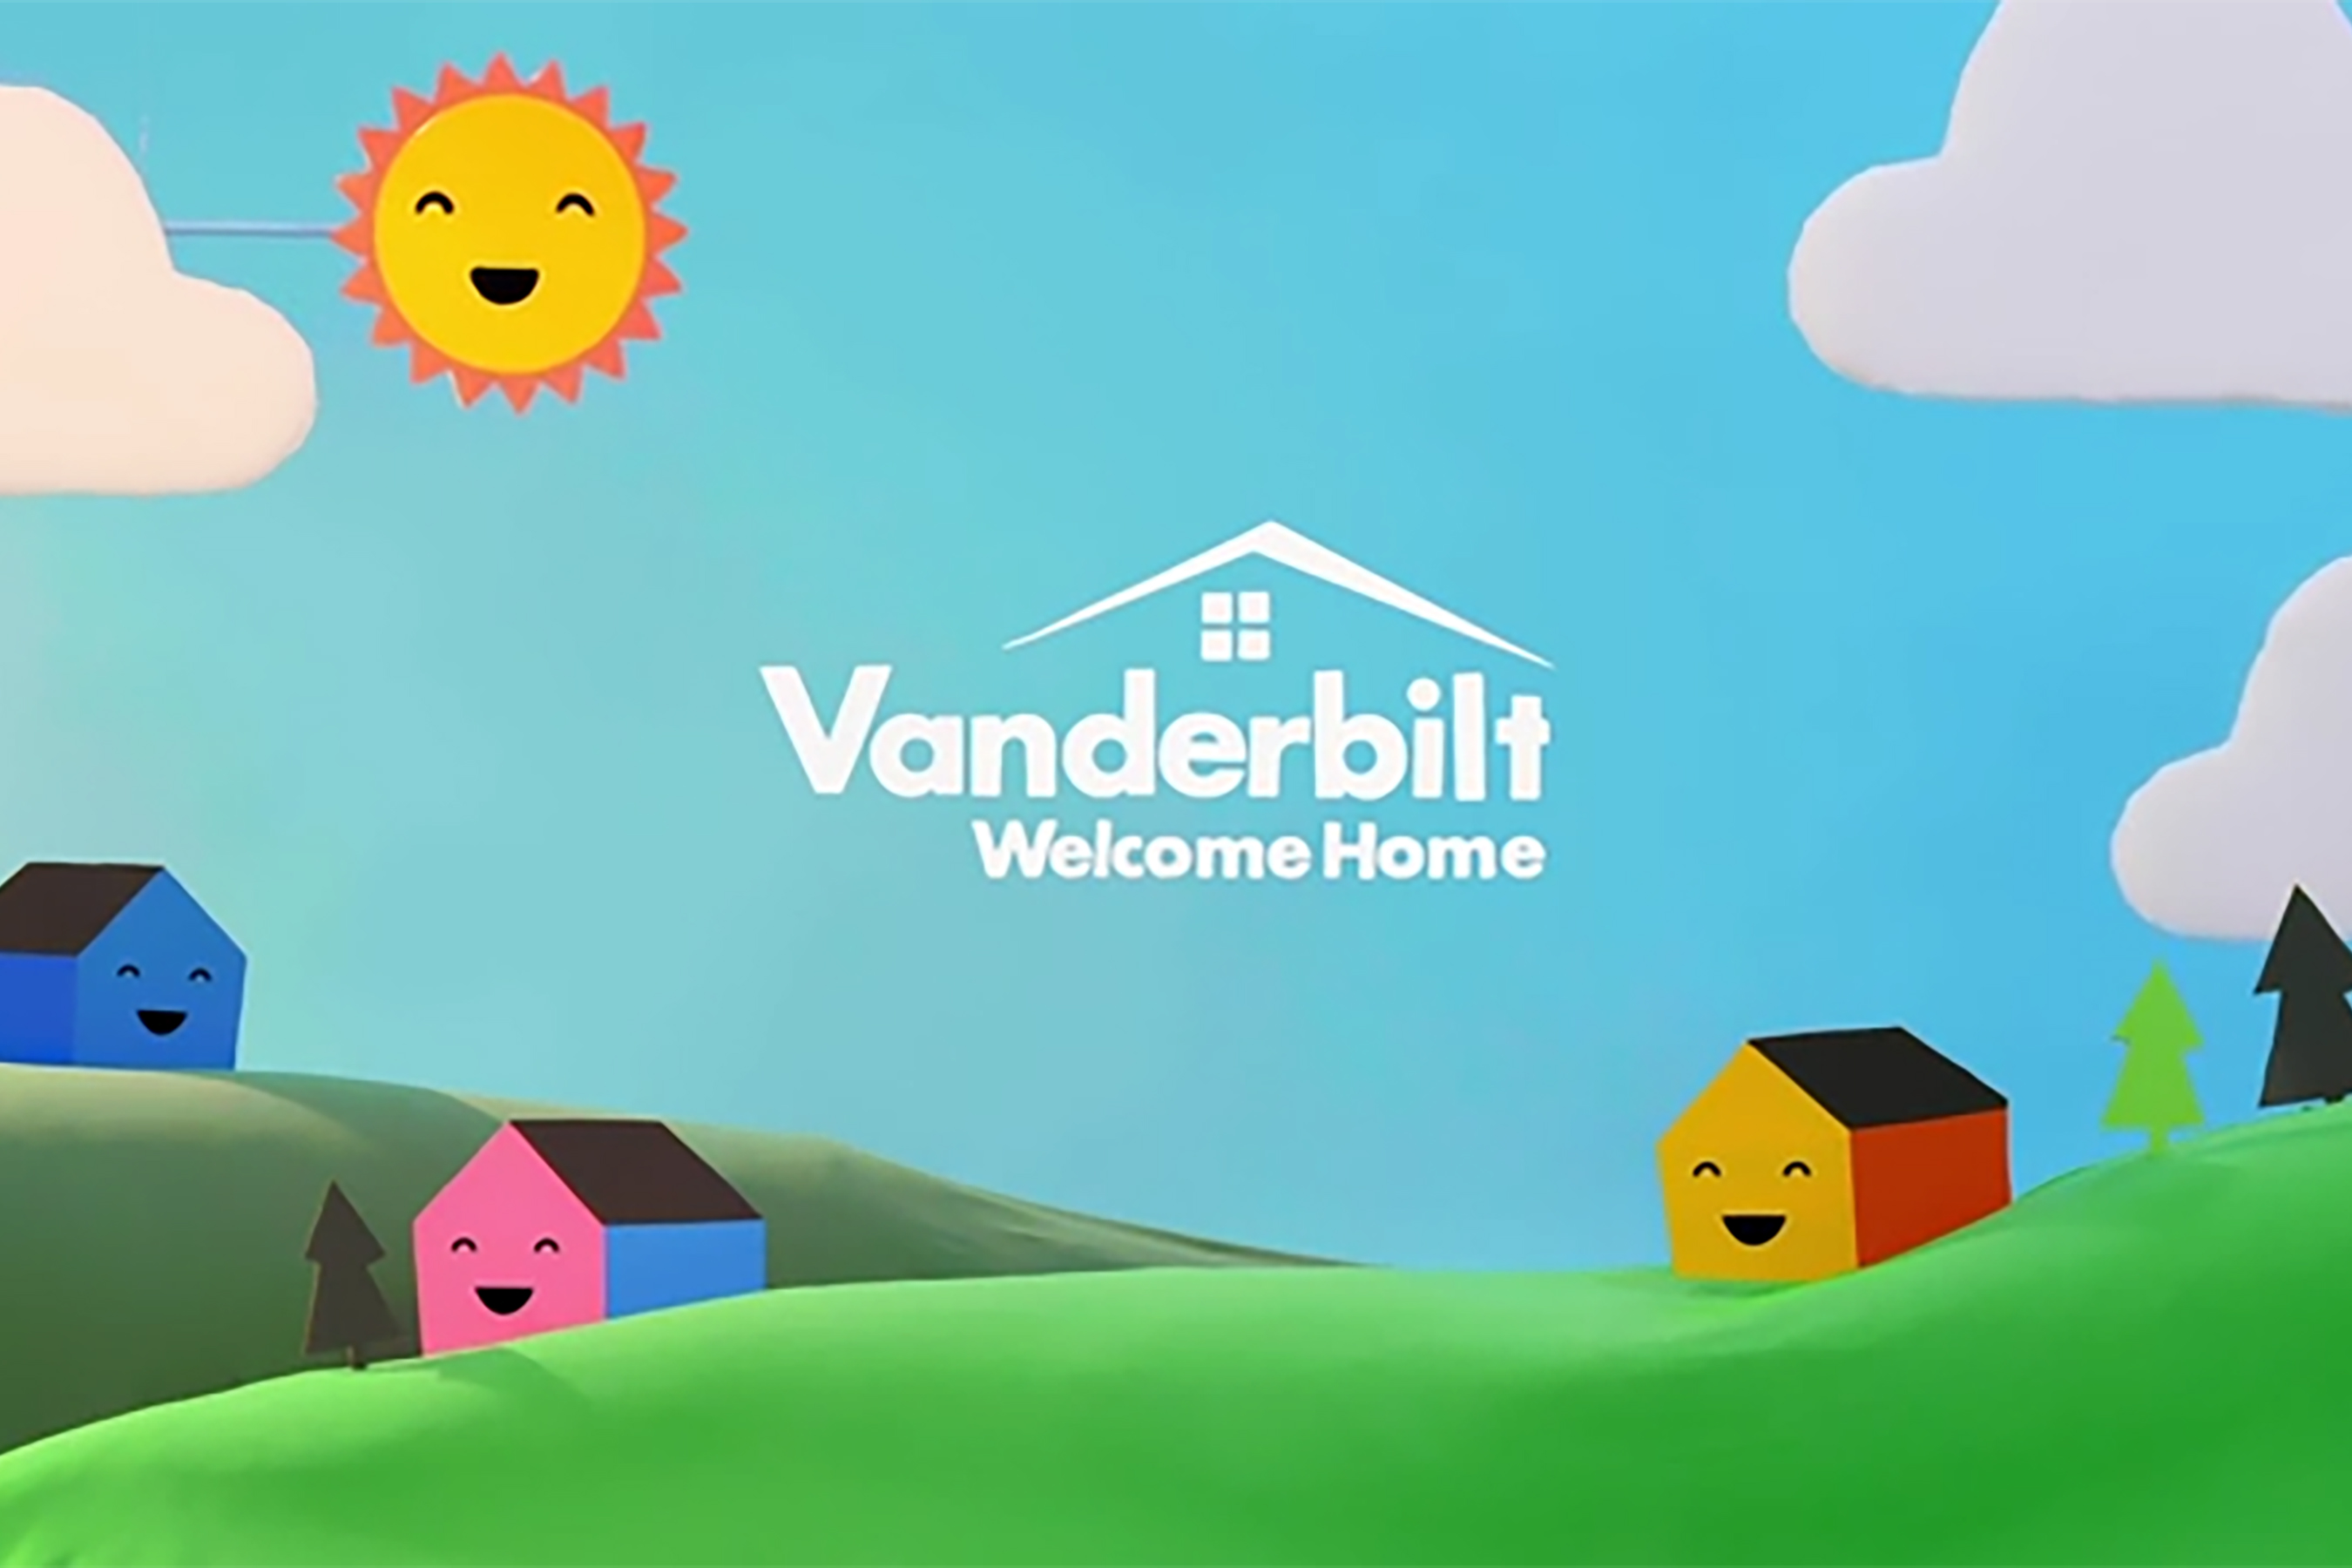 Vanderbilt continues to work towards making the loan process easier for customers to understand and complete.